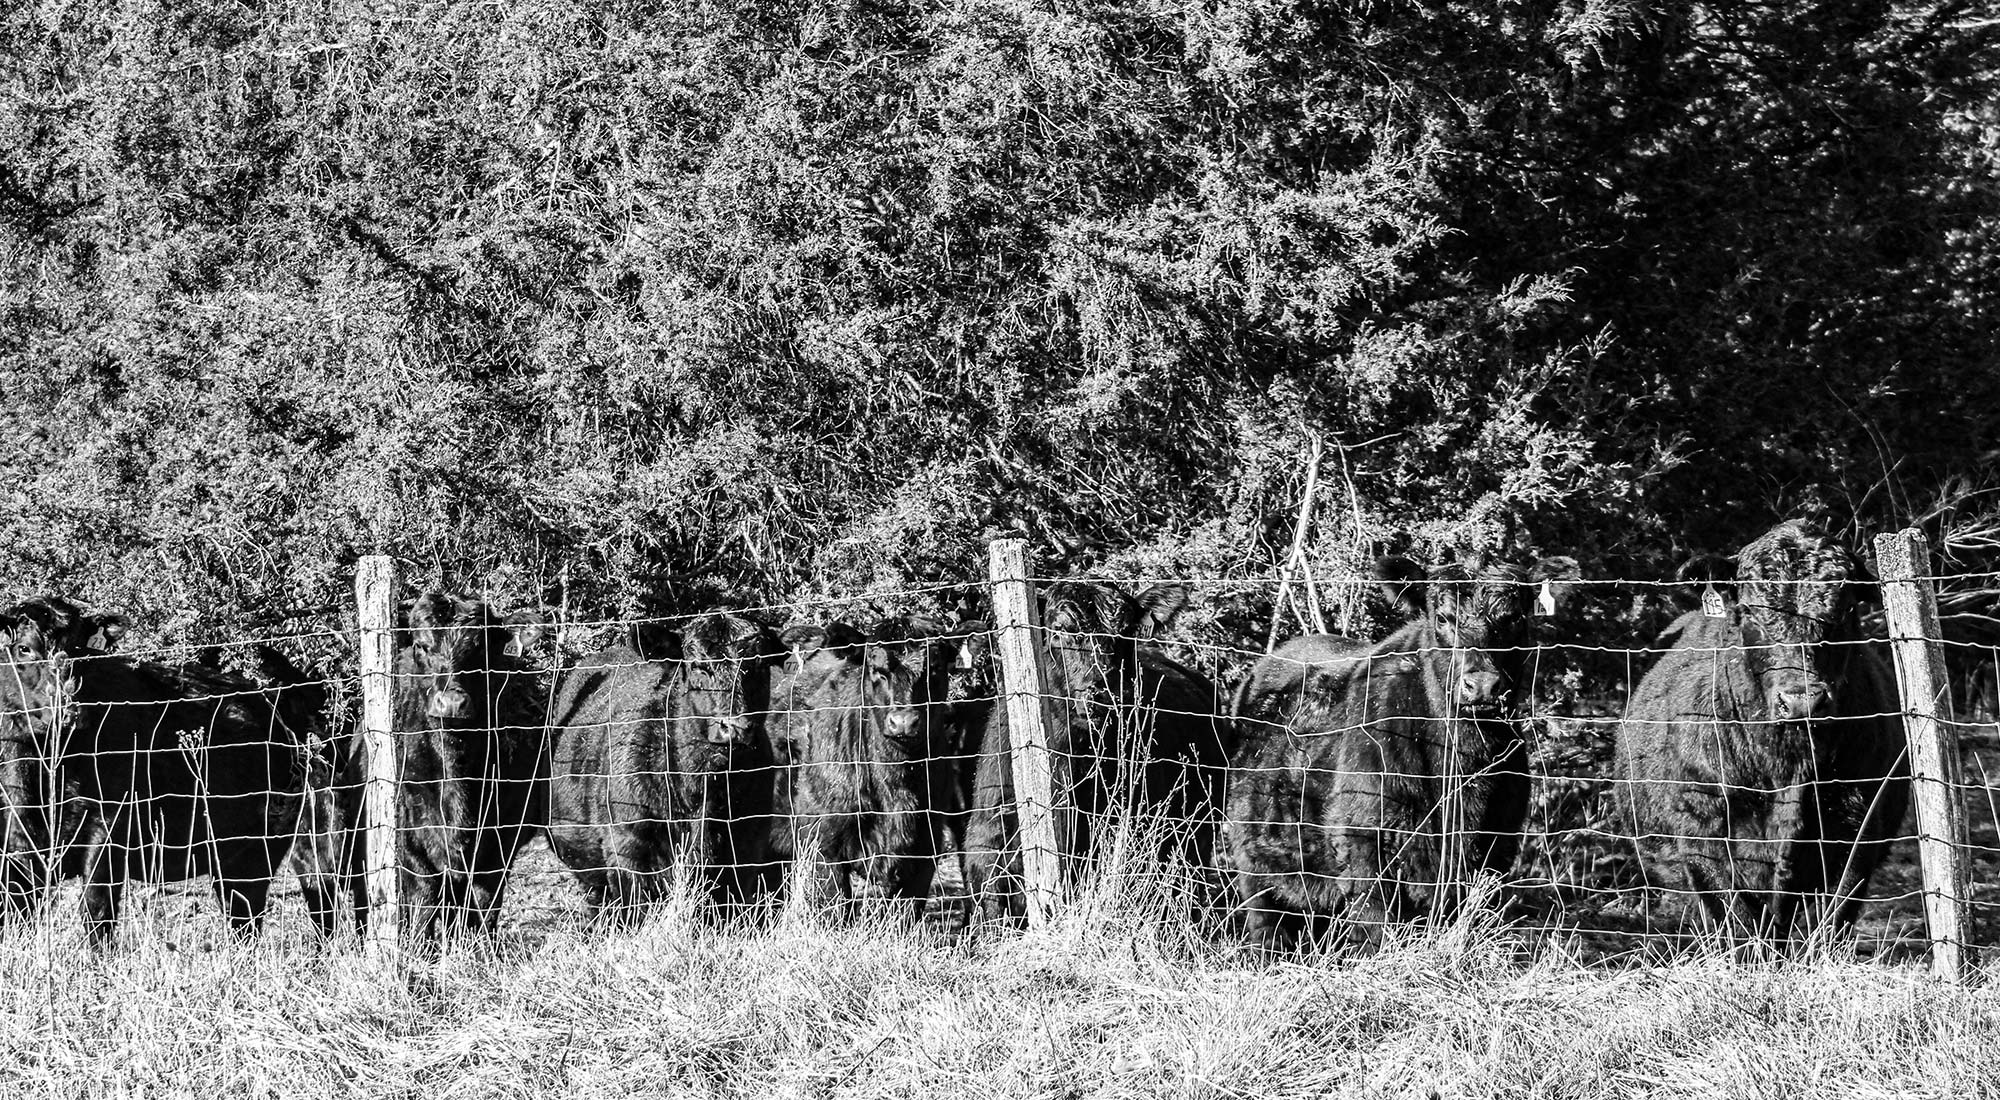 Cows lined up at fence